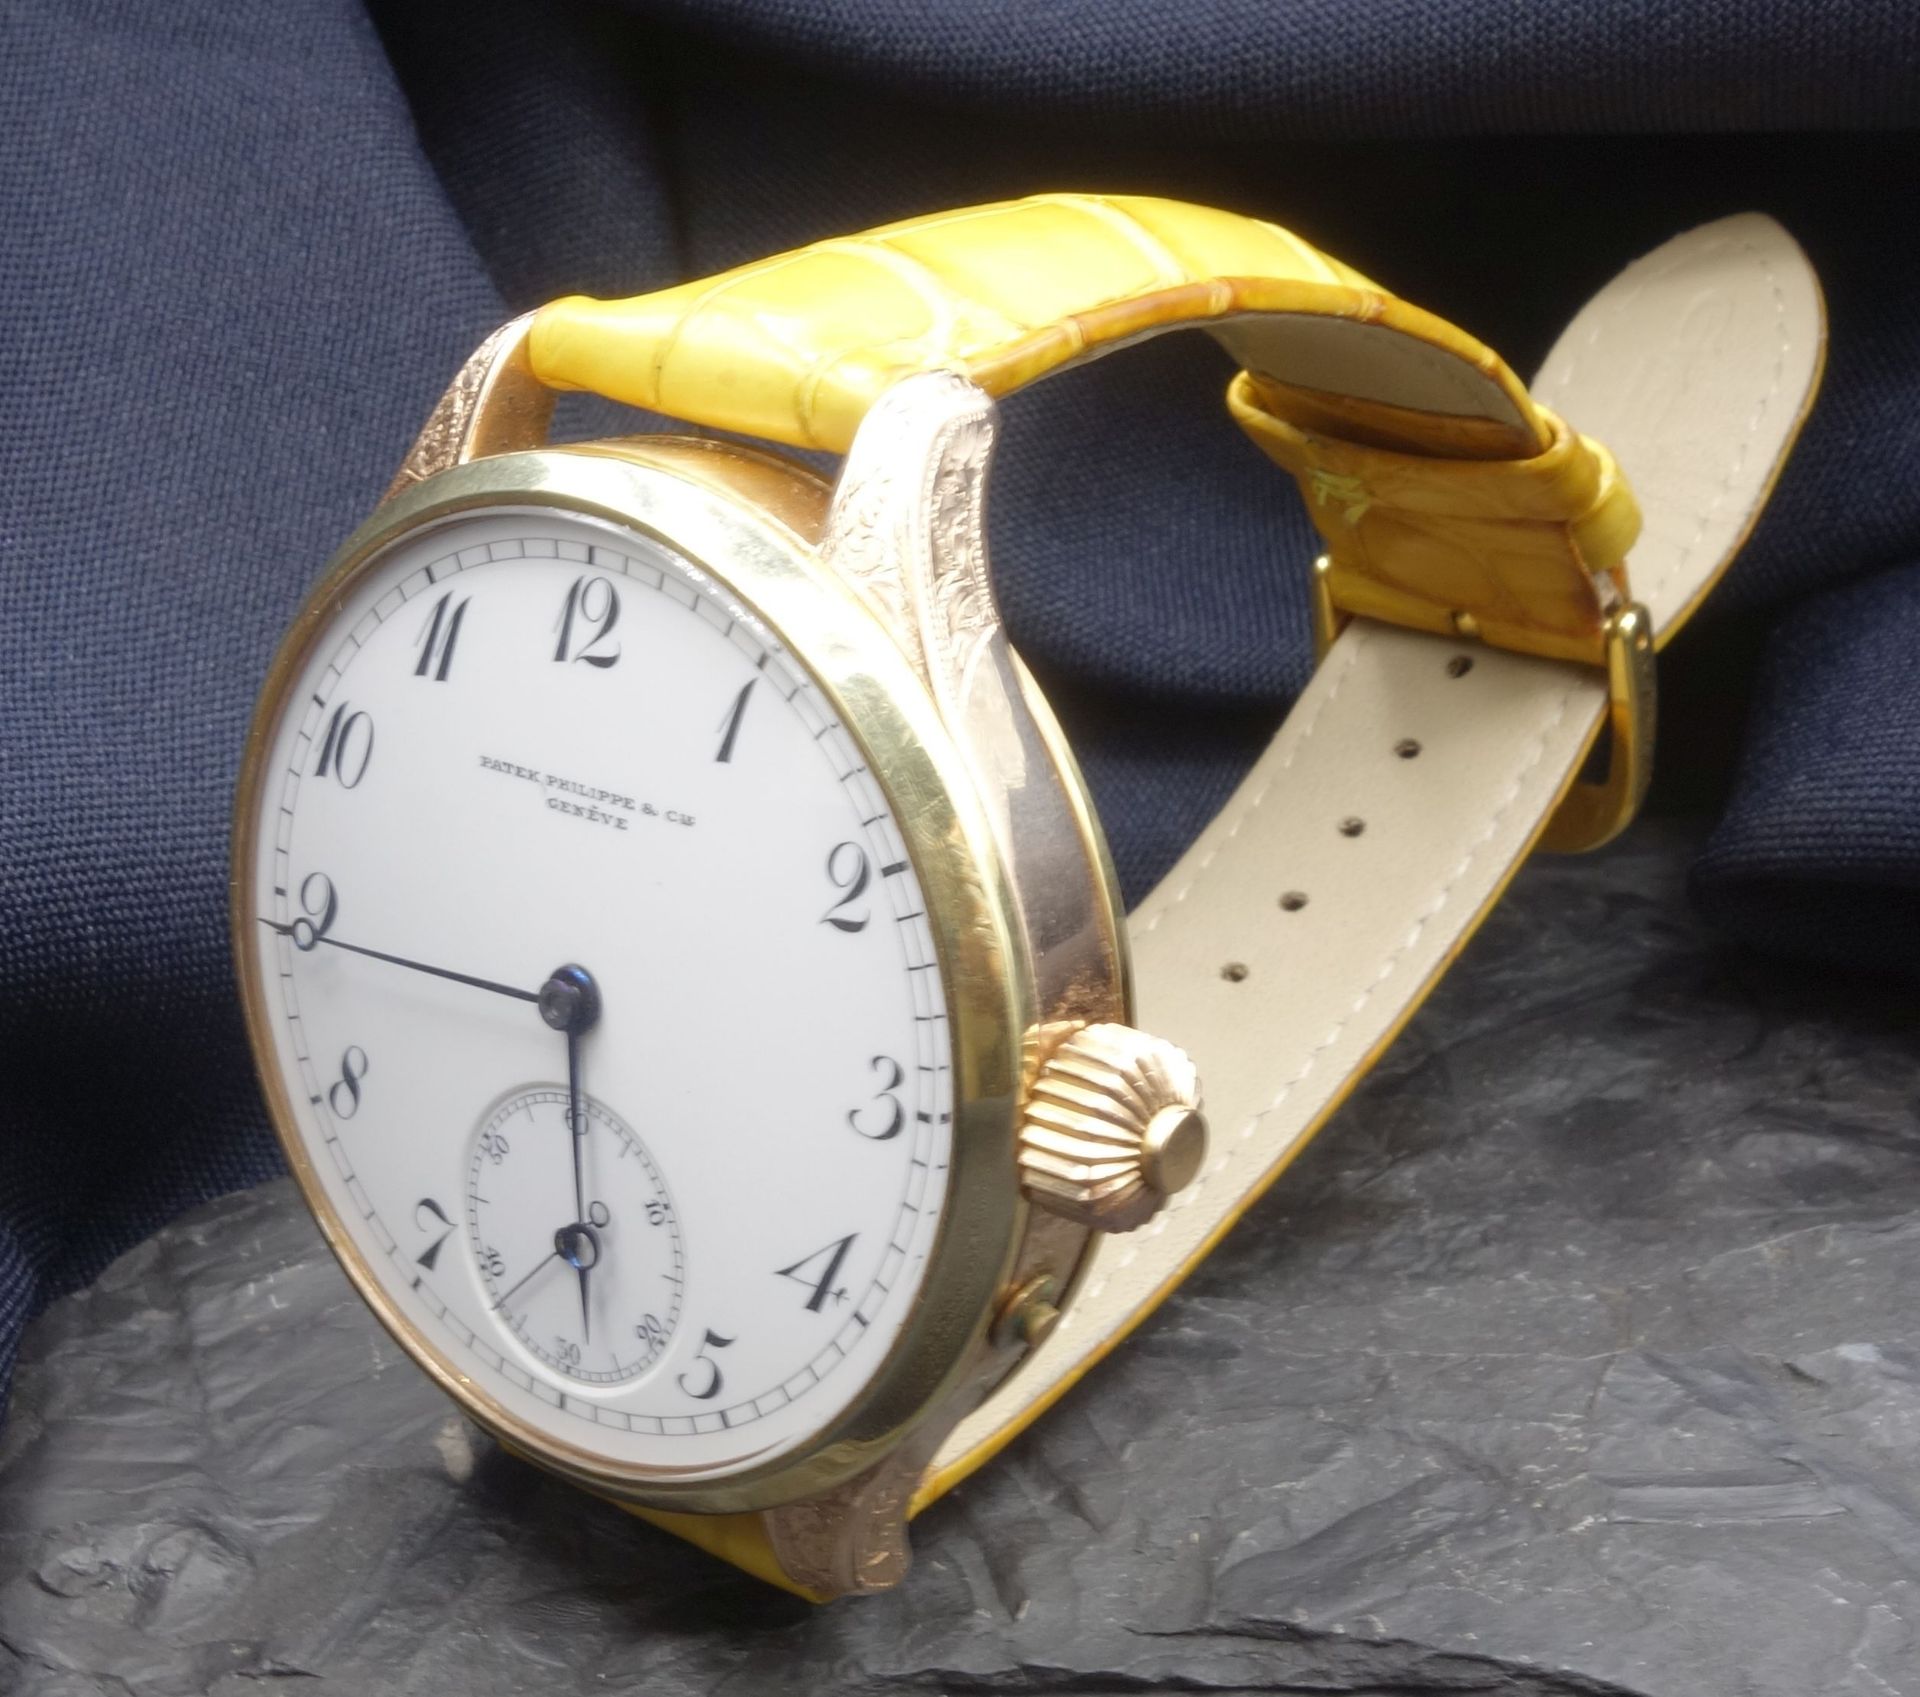 MARIAGE: WRIST WATCH FROM PATEK PHILIPPE POCKET WATCH - Image 7 of 8